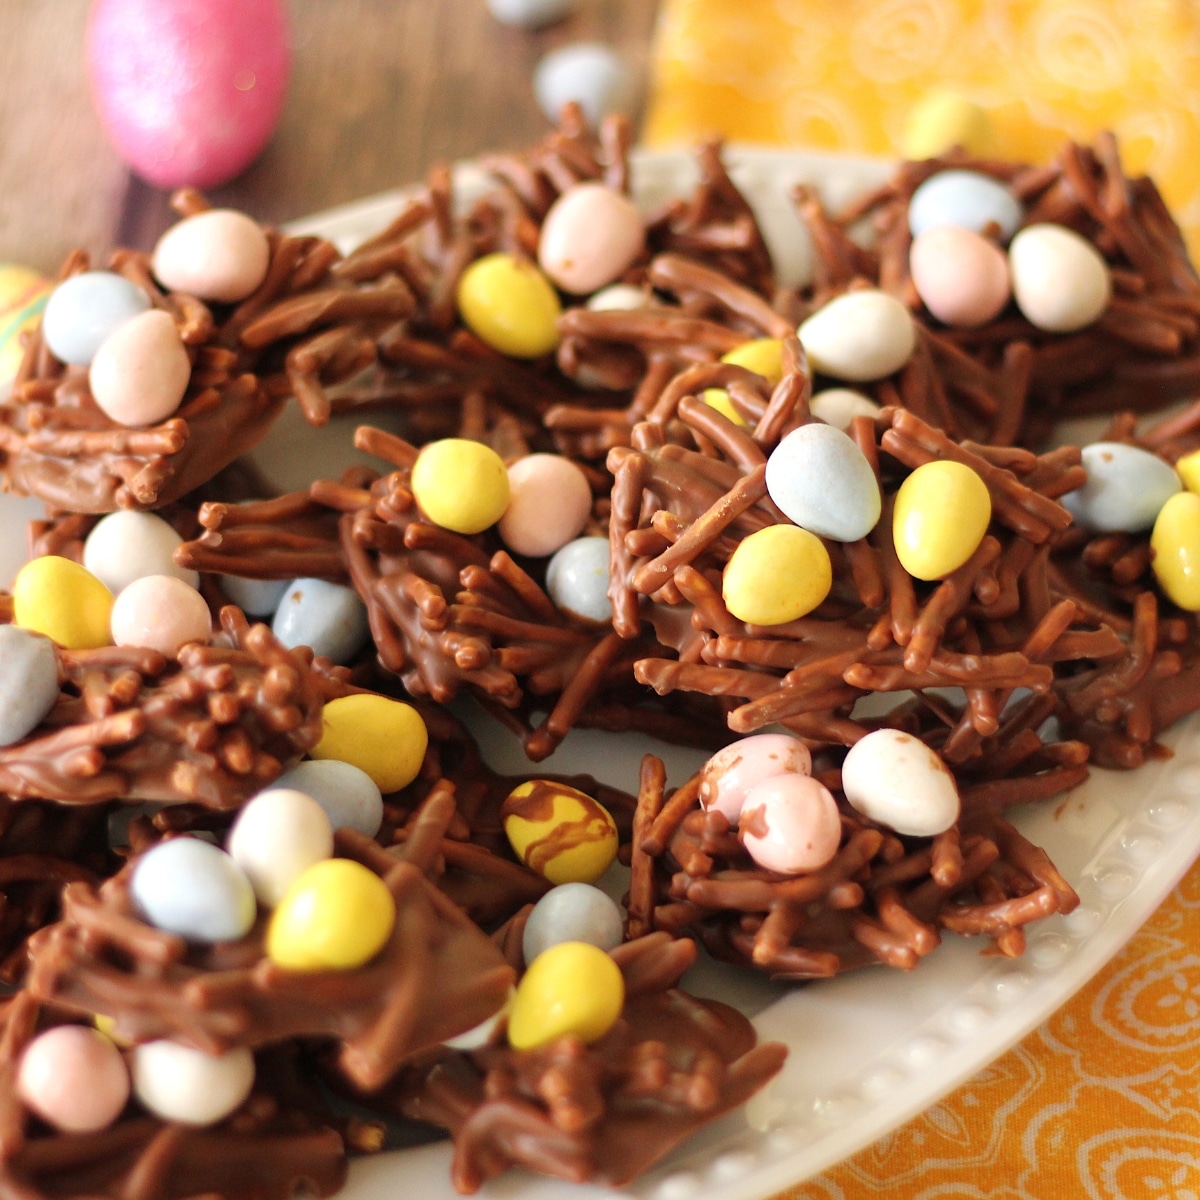 cookies that look like bird's nests topped with chocolate egg shaped candies